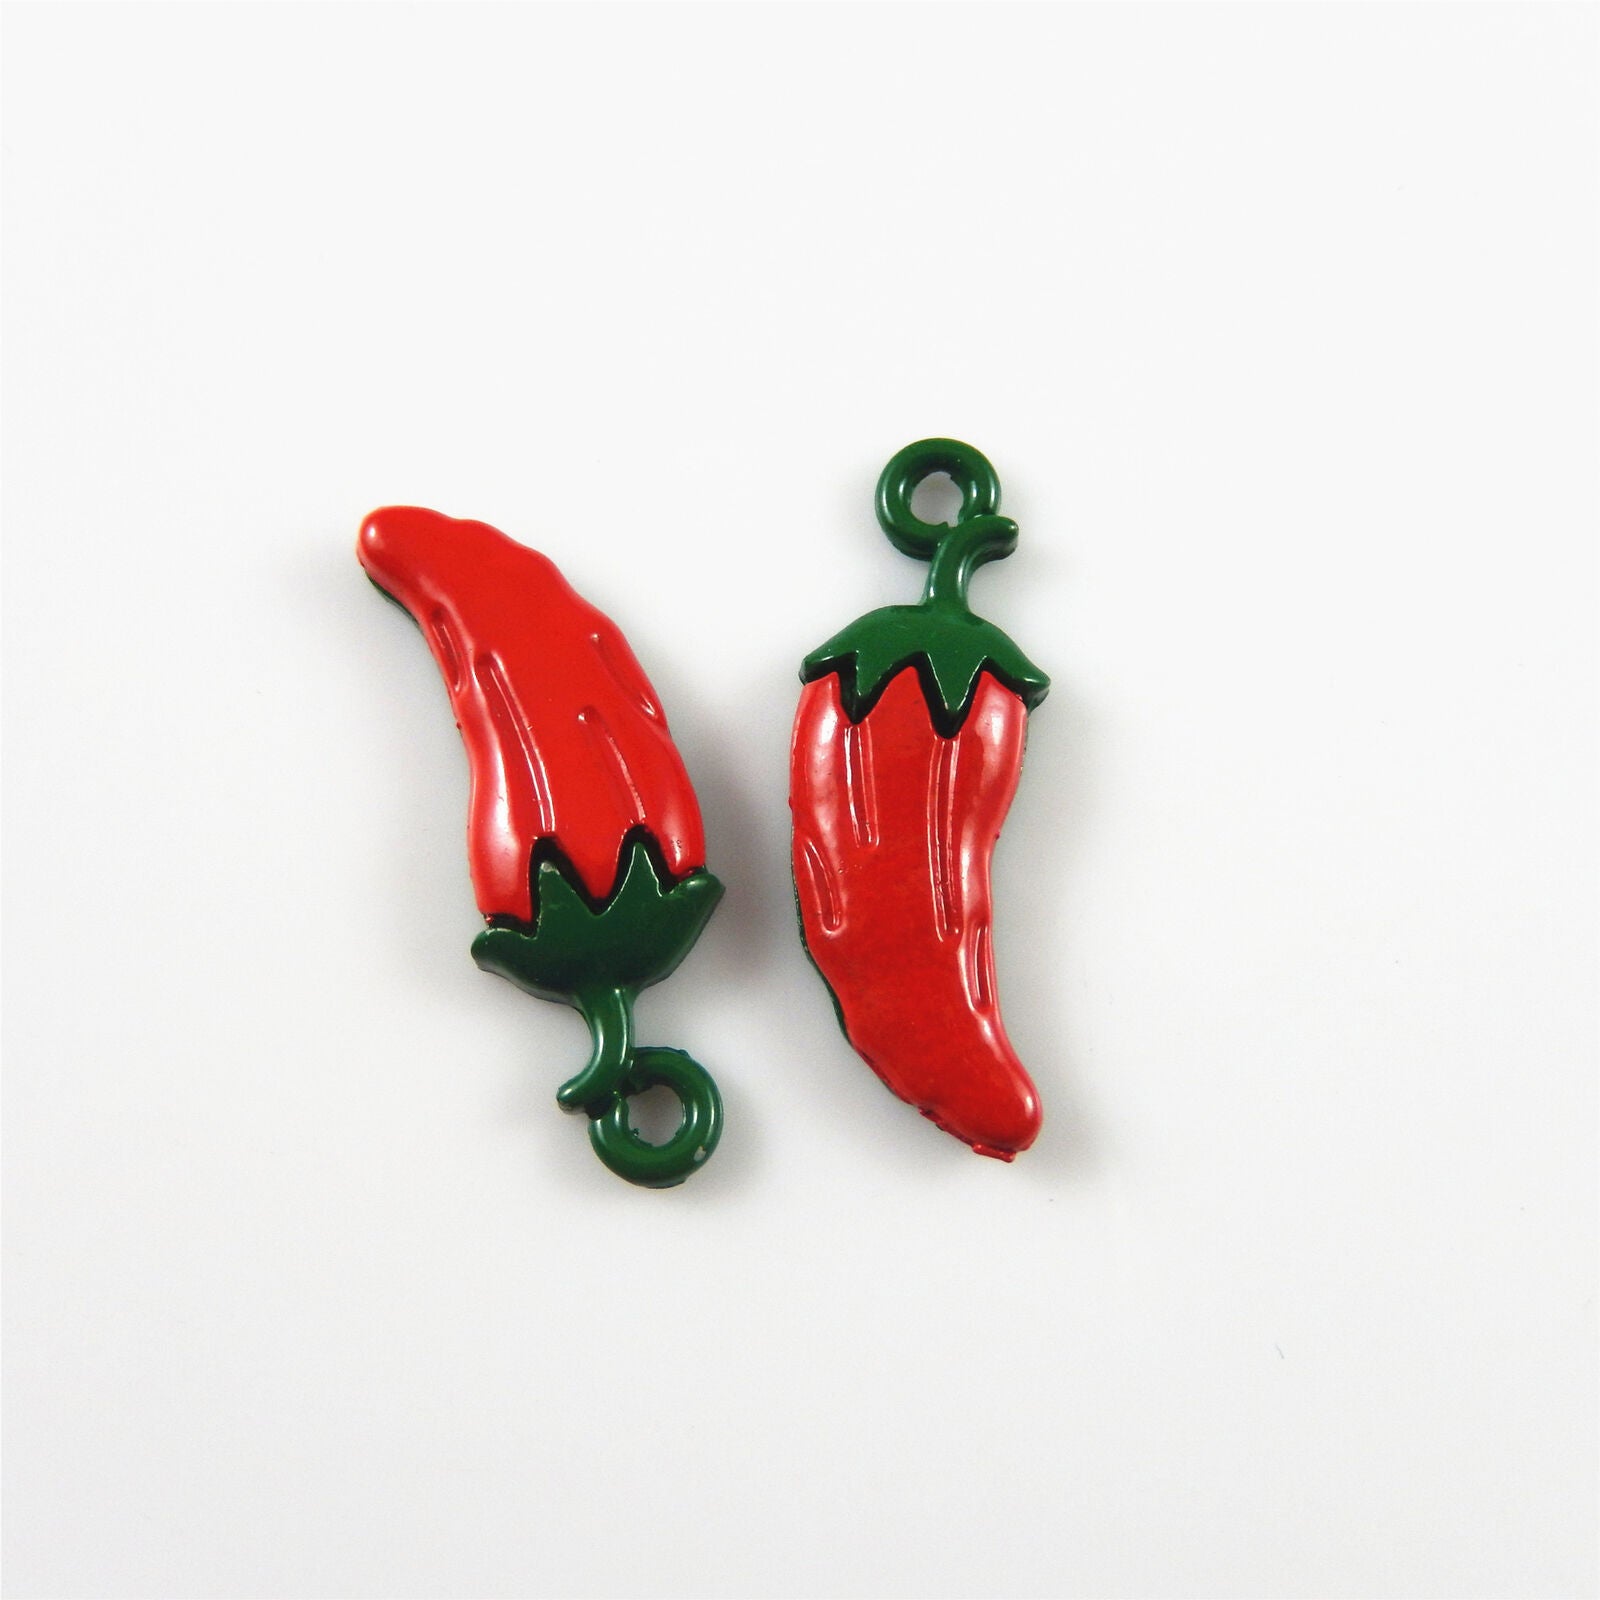 10 pcs Painted Red Alloy Chili Charm Pendant Findings 25x13 mm #52992